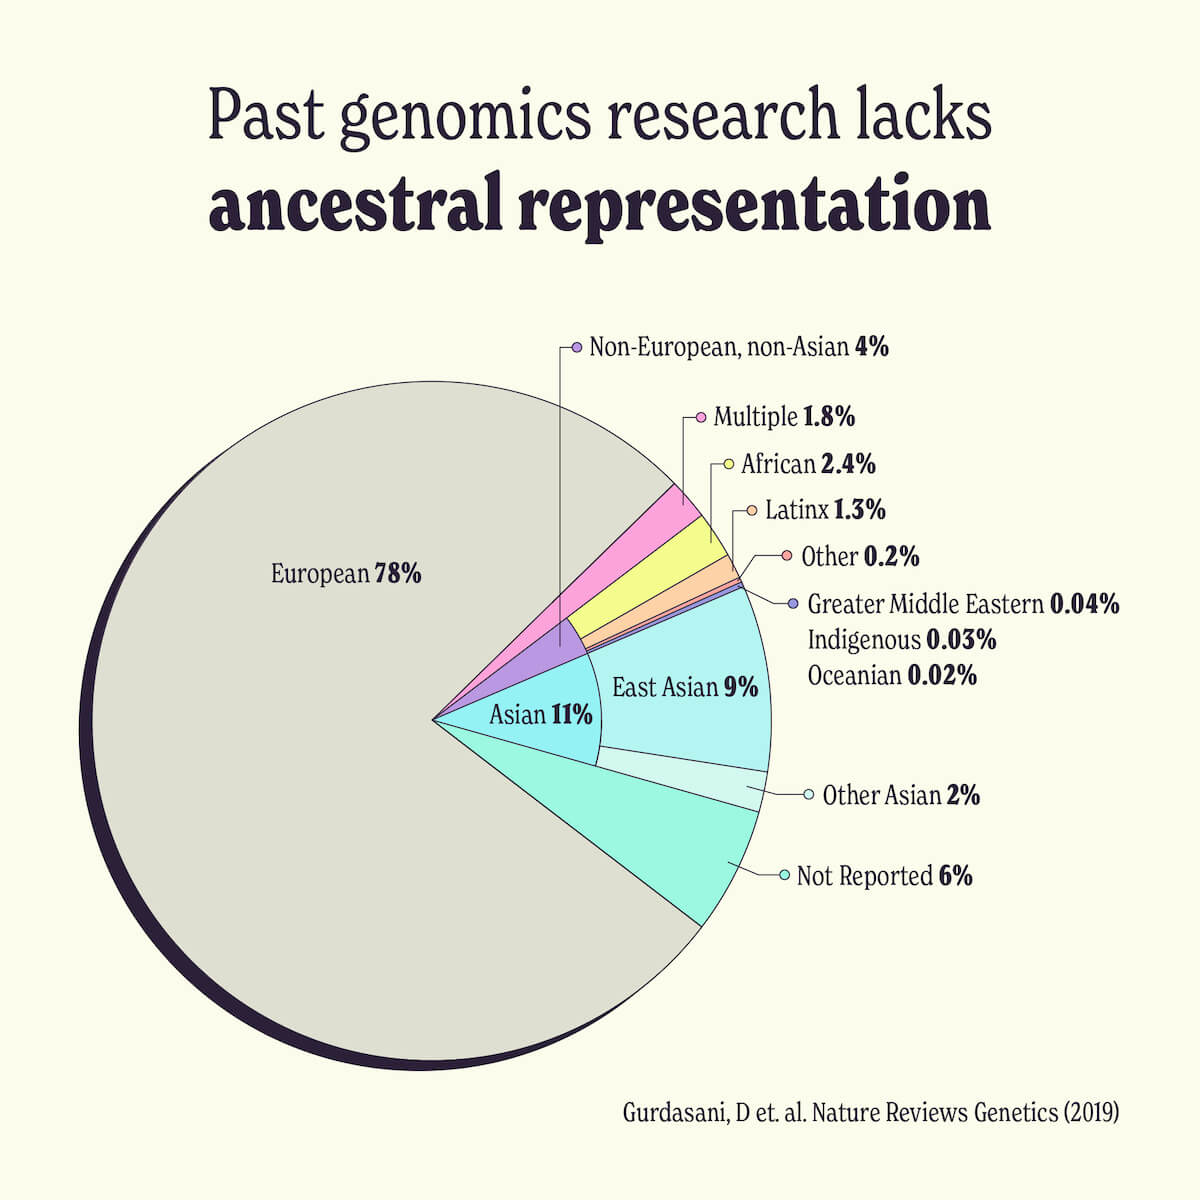 Pie chart showing past genomics research lacks ancestral representation of non-European subjects.